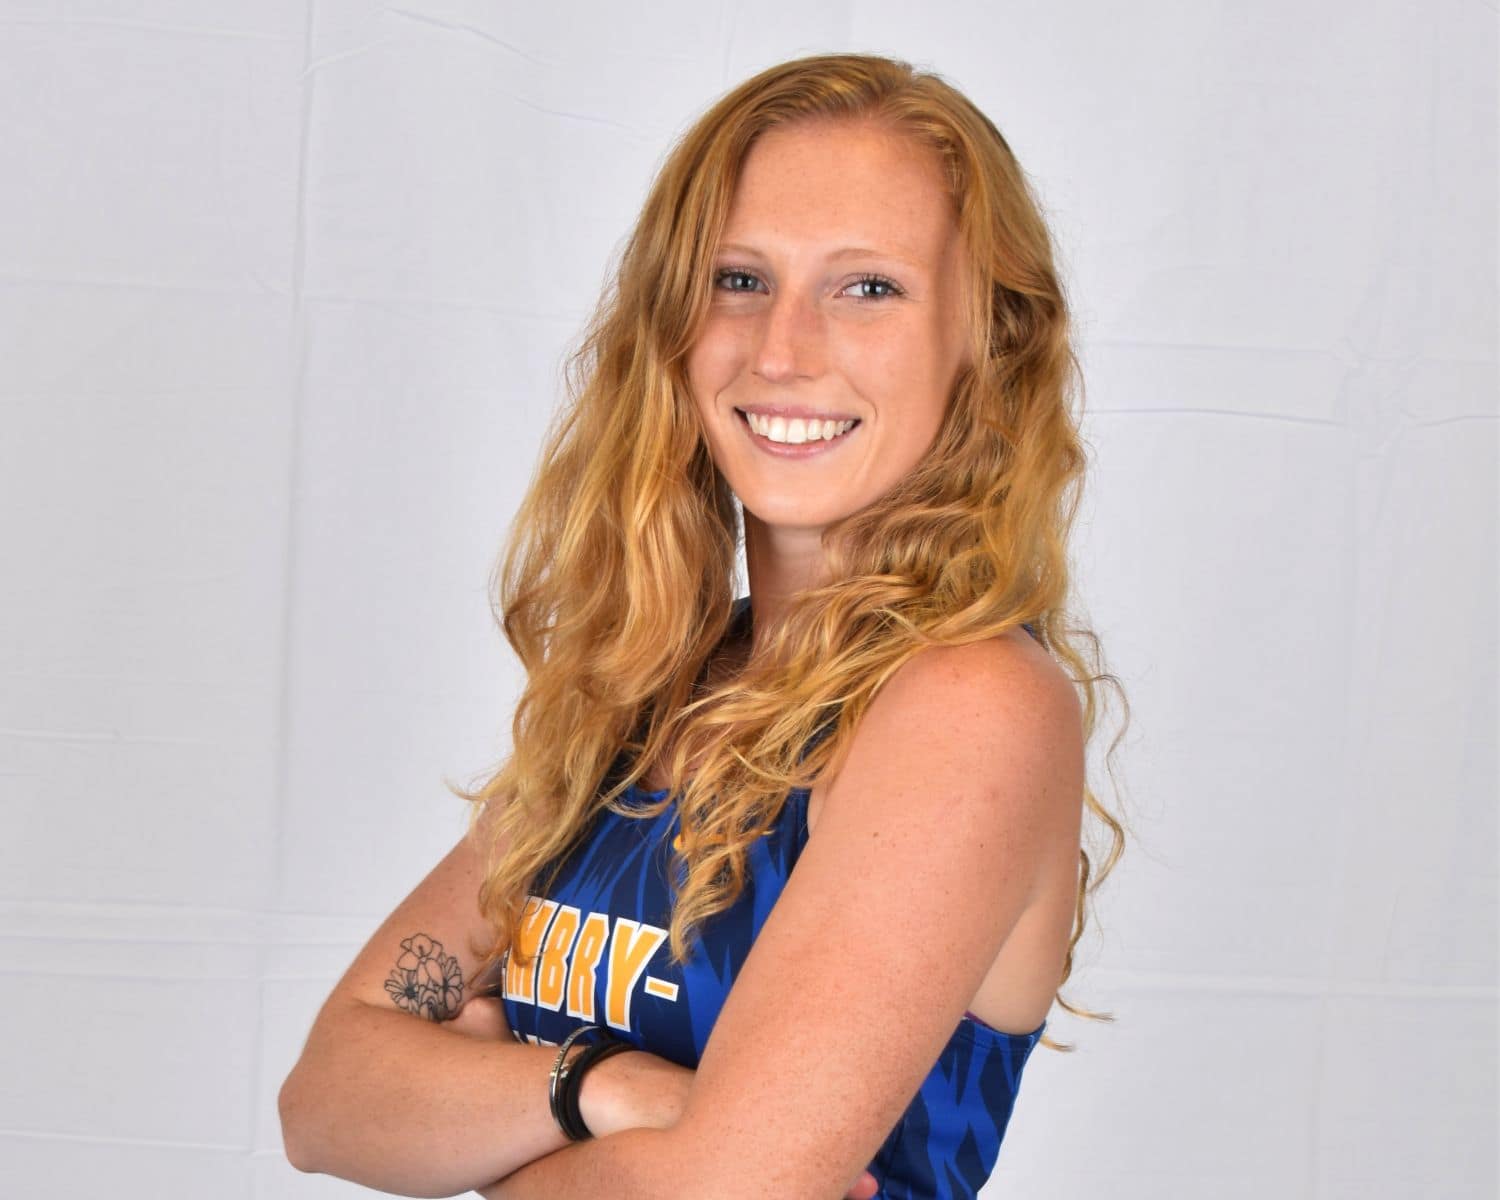 Abigail Valley posing for Cross Country and Track & Field. (Photo: Embry-Riddle)